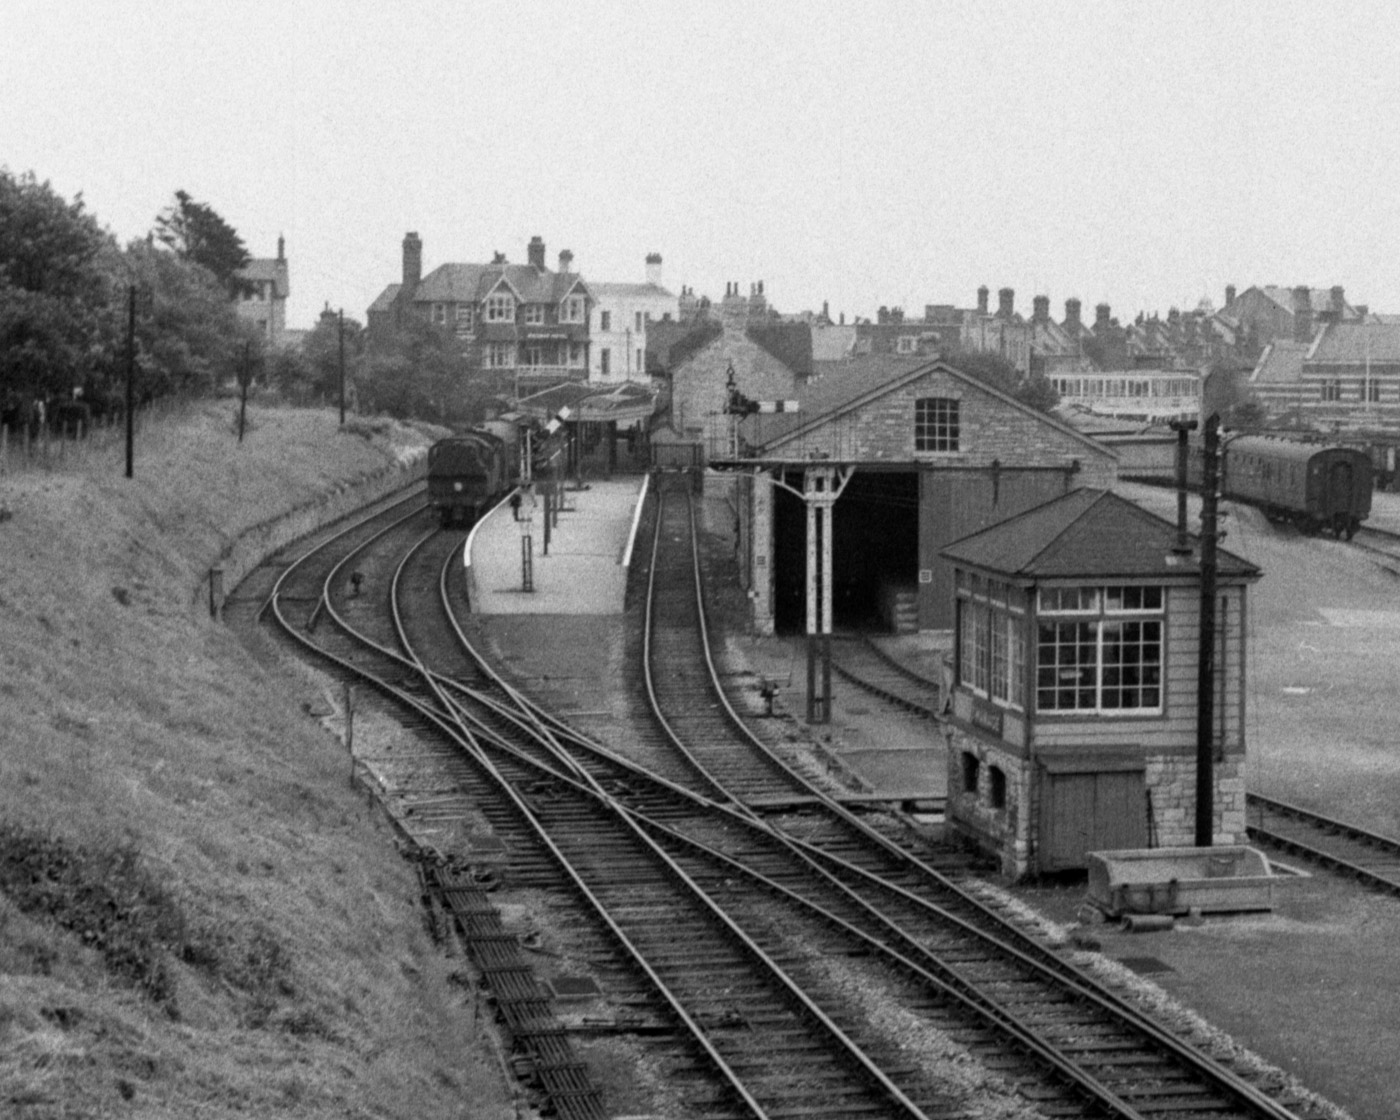 Swanage Railway from the bridge in 1965